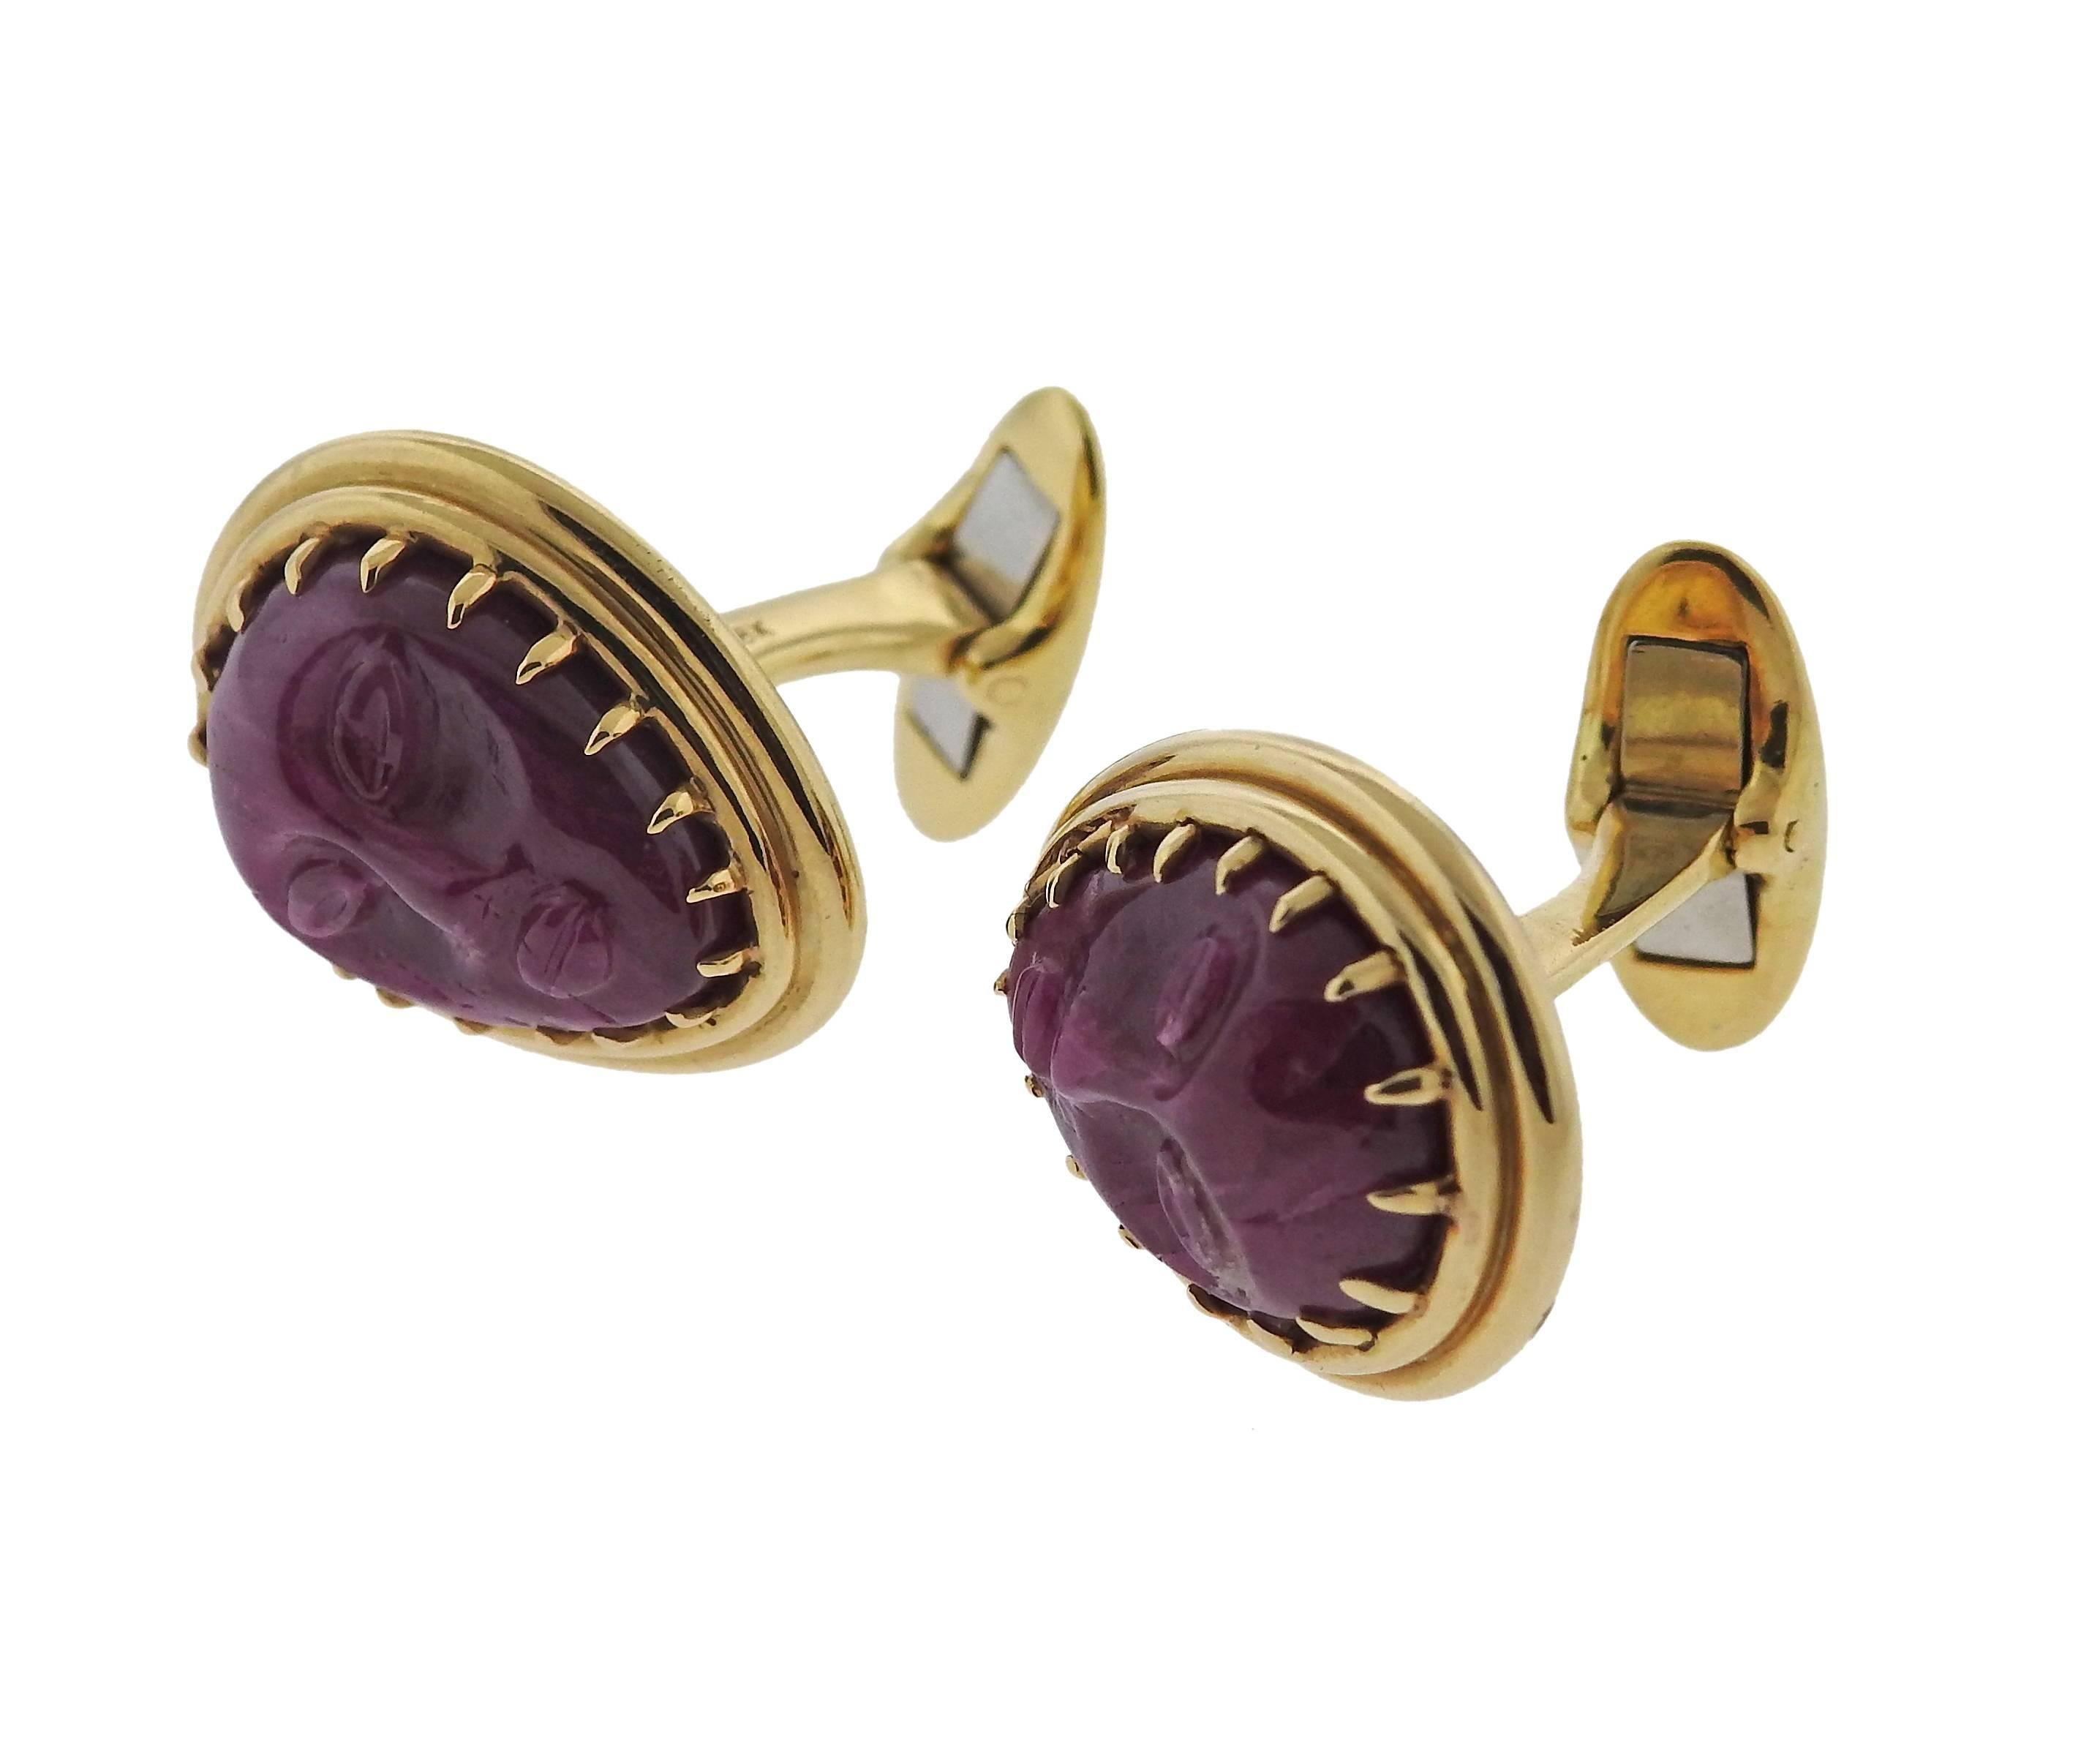 Pair of unusual 18k yellow gold large cufflinks, decorated with carved rubies, depicting faces. Each top measures 23mm x 18mm. Marked 18k. Weight - 29.4 grams 